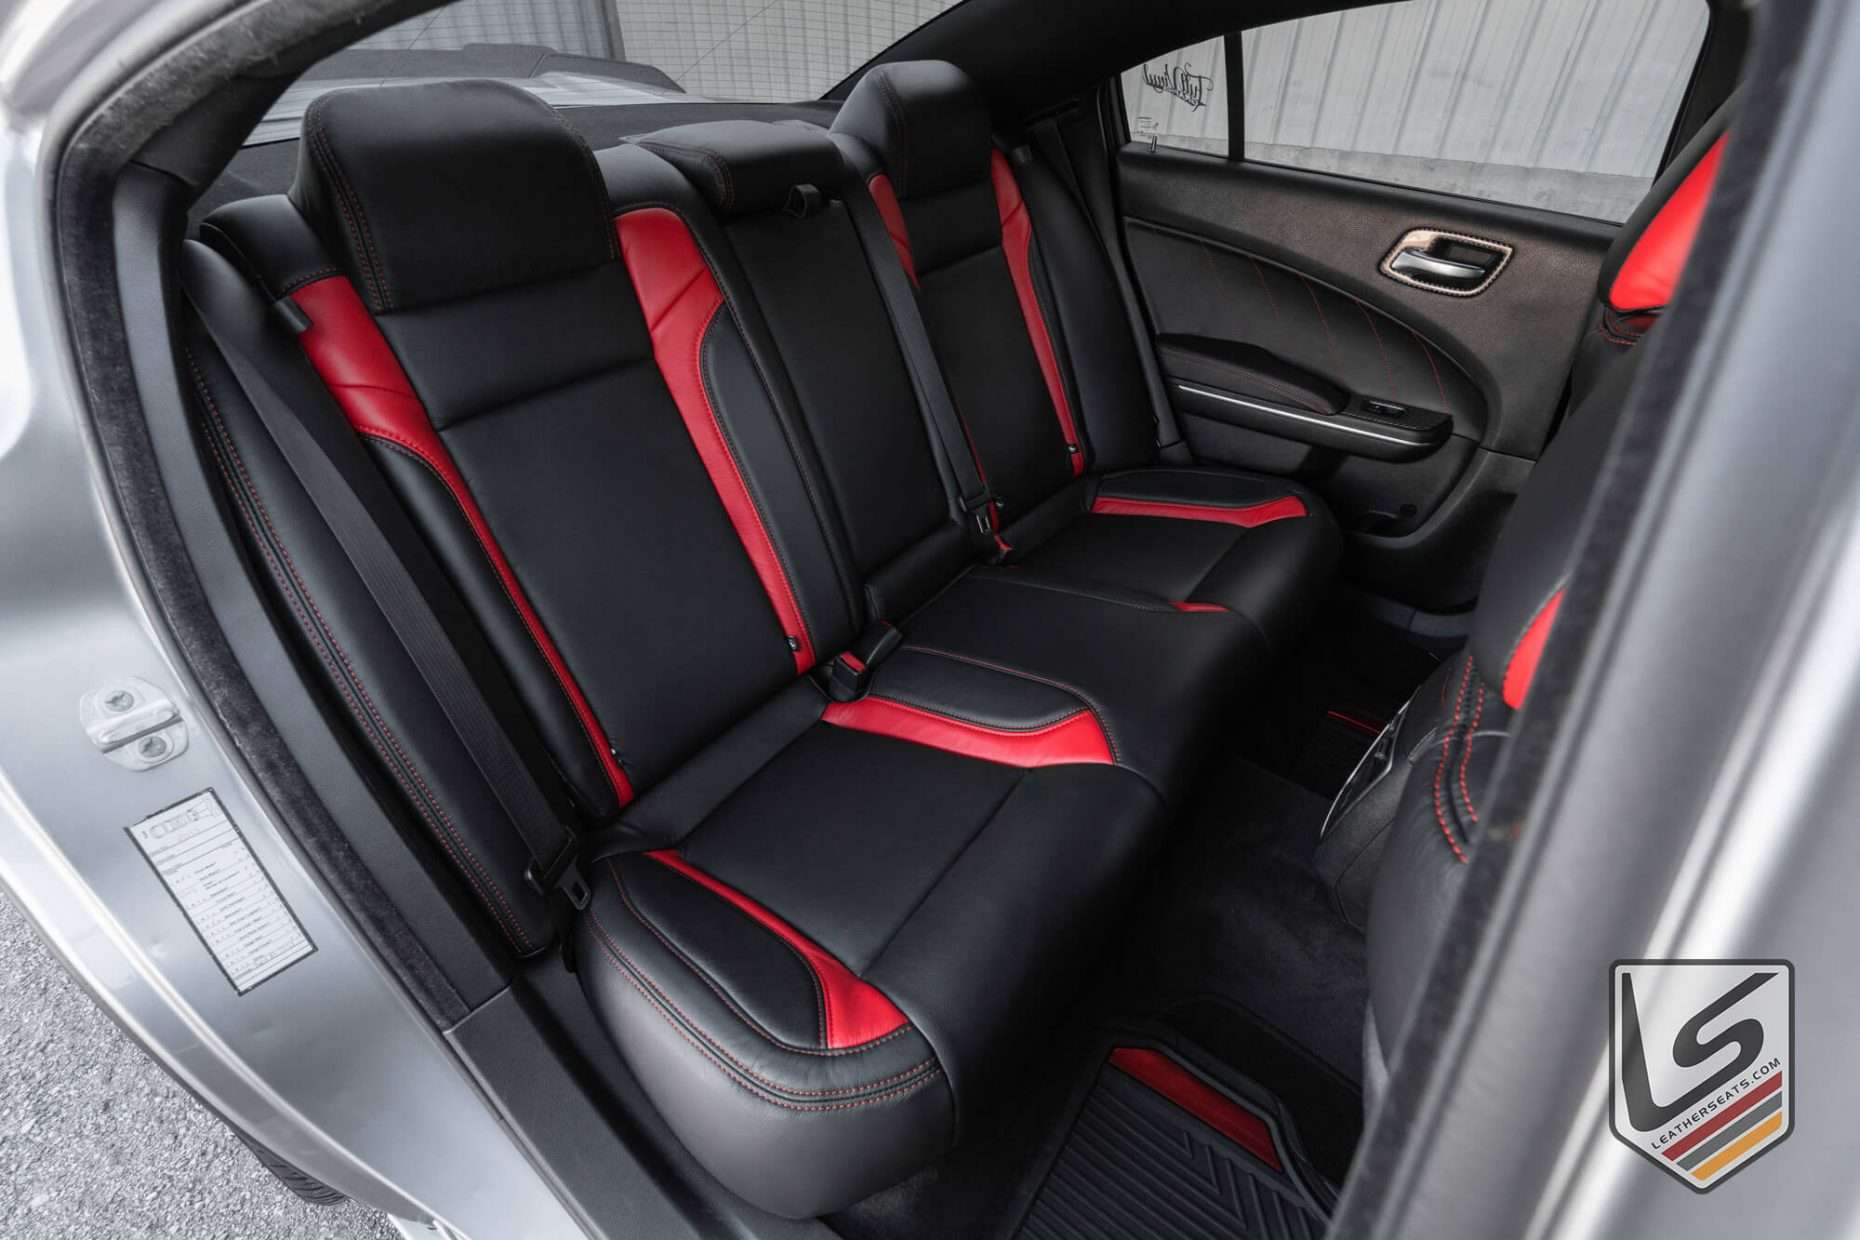 Black and Bright Red rear seats - passenger side